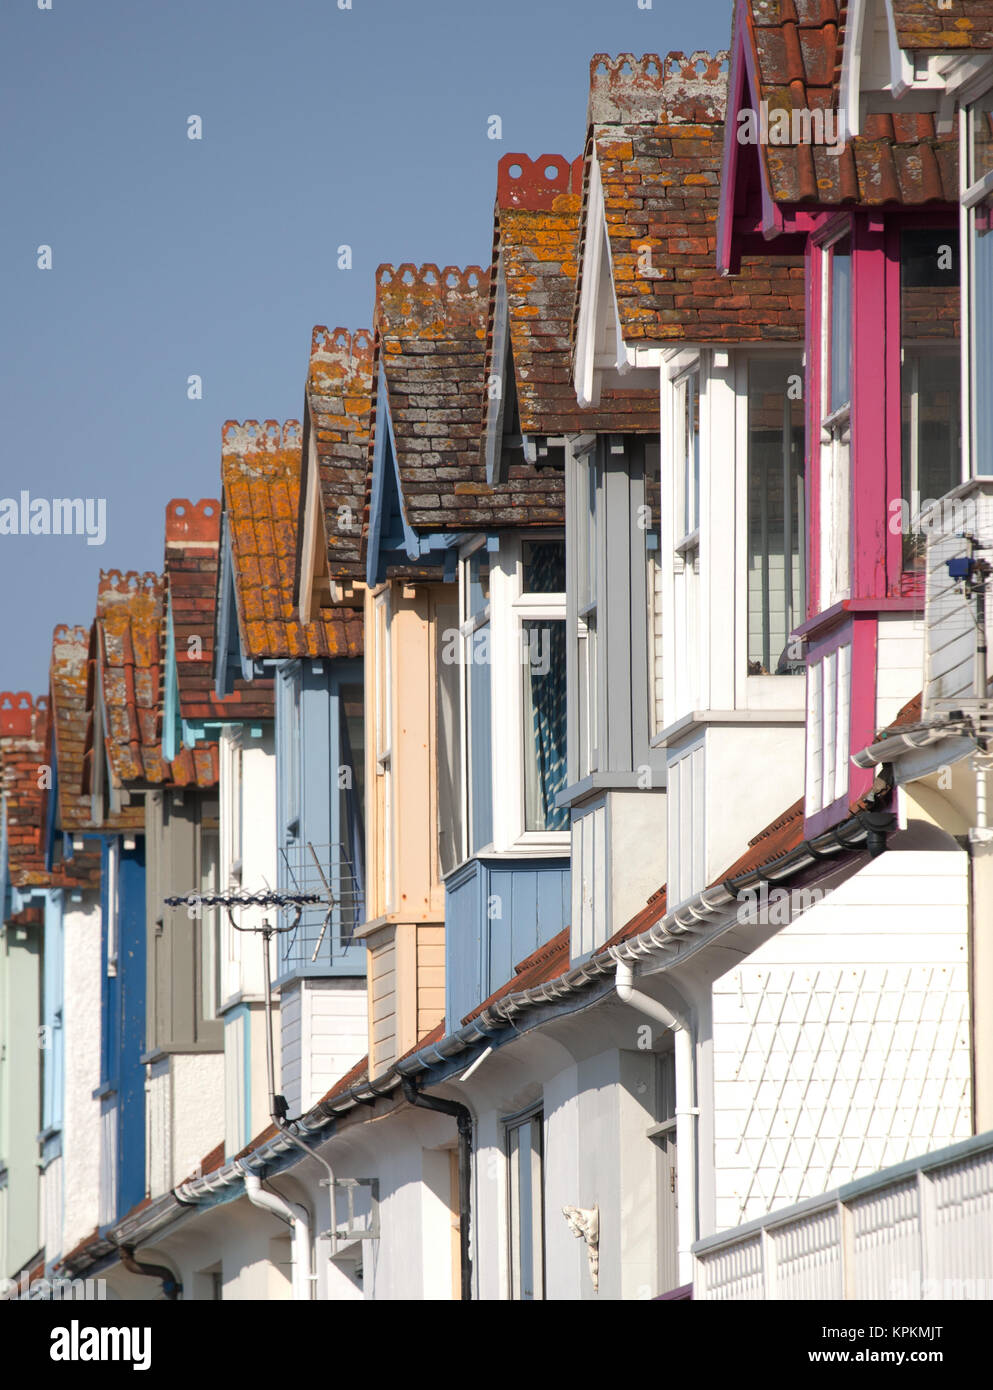 Dormer windows atop the terraced Victorian houses of Wave Crest, Whitstable, Kent, England. Stock Photo